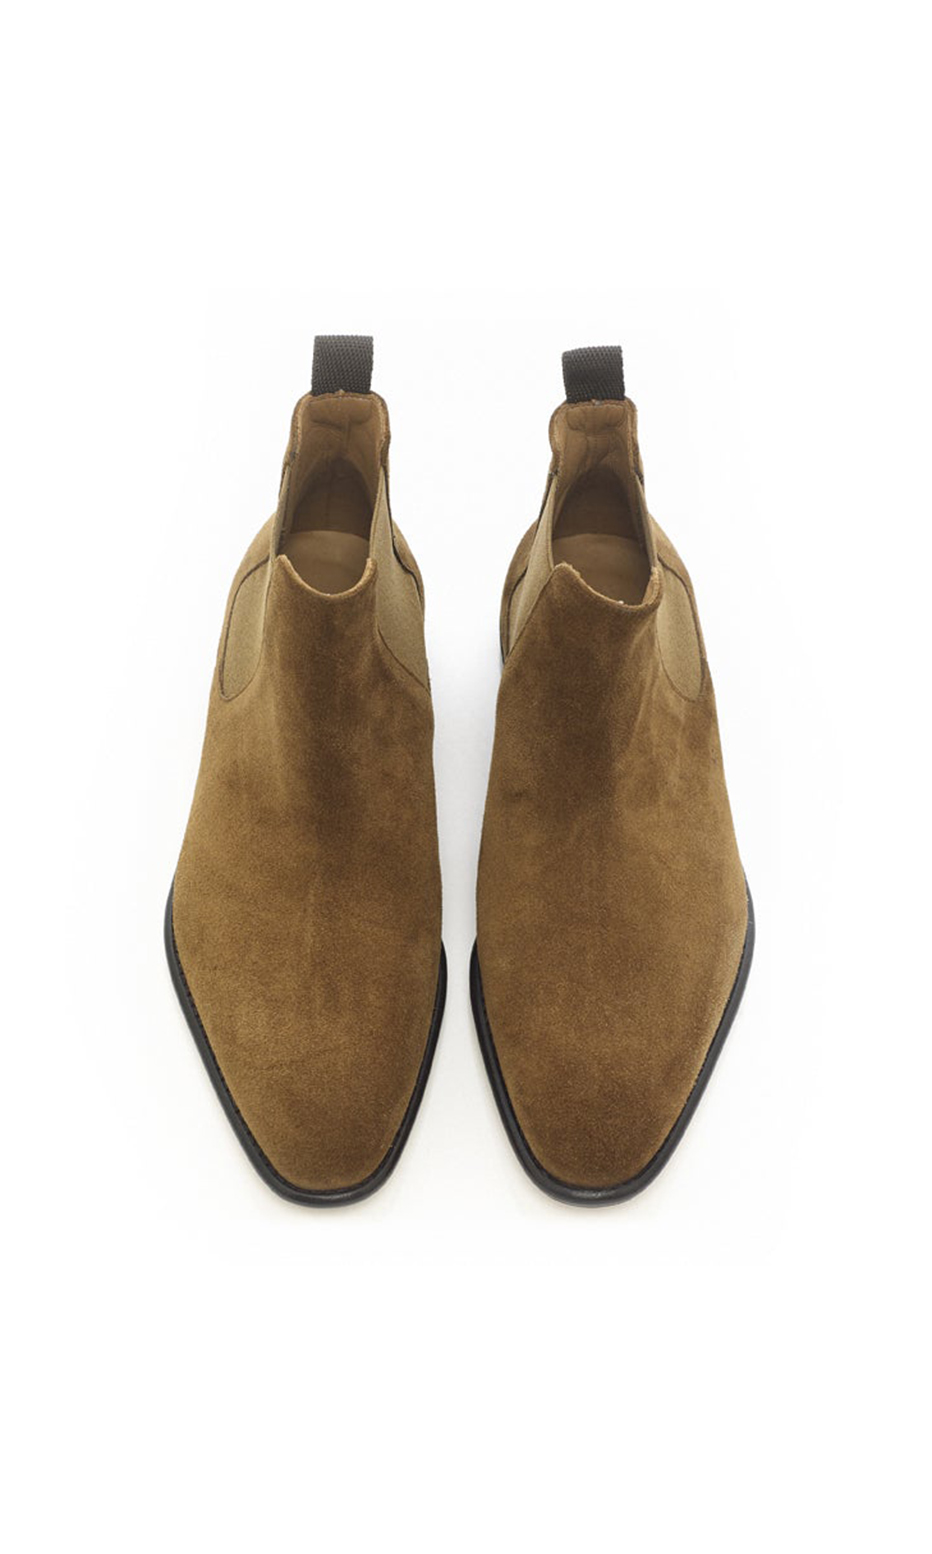 brown chelsea boots in suede leather mariano shoes